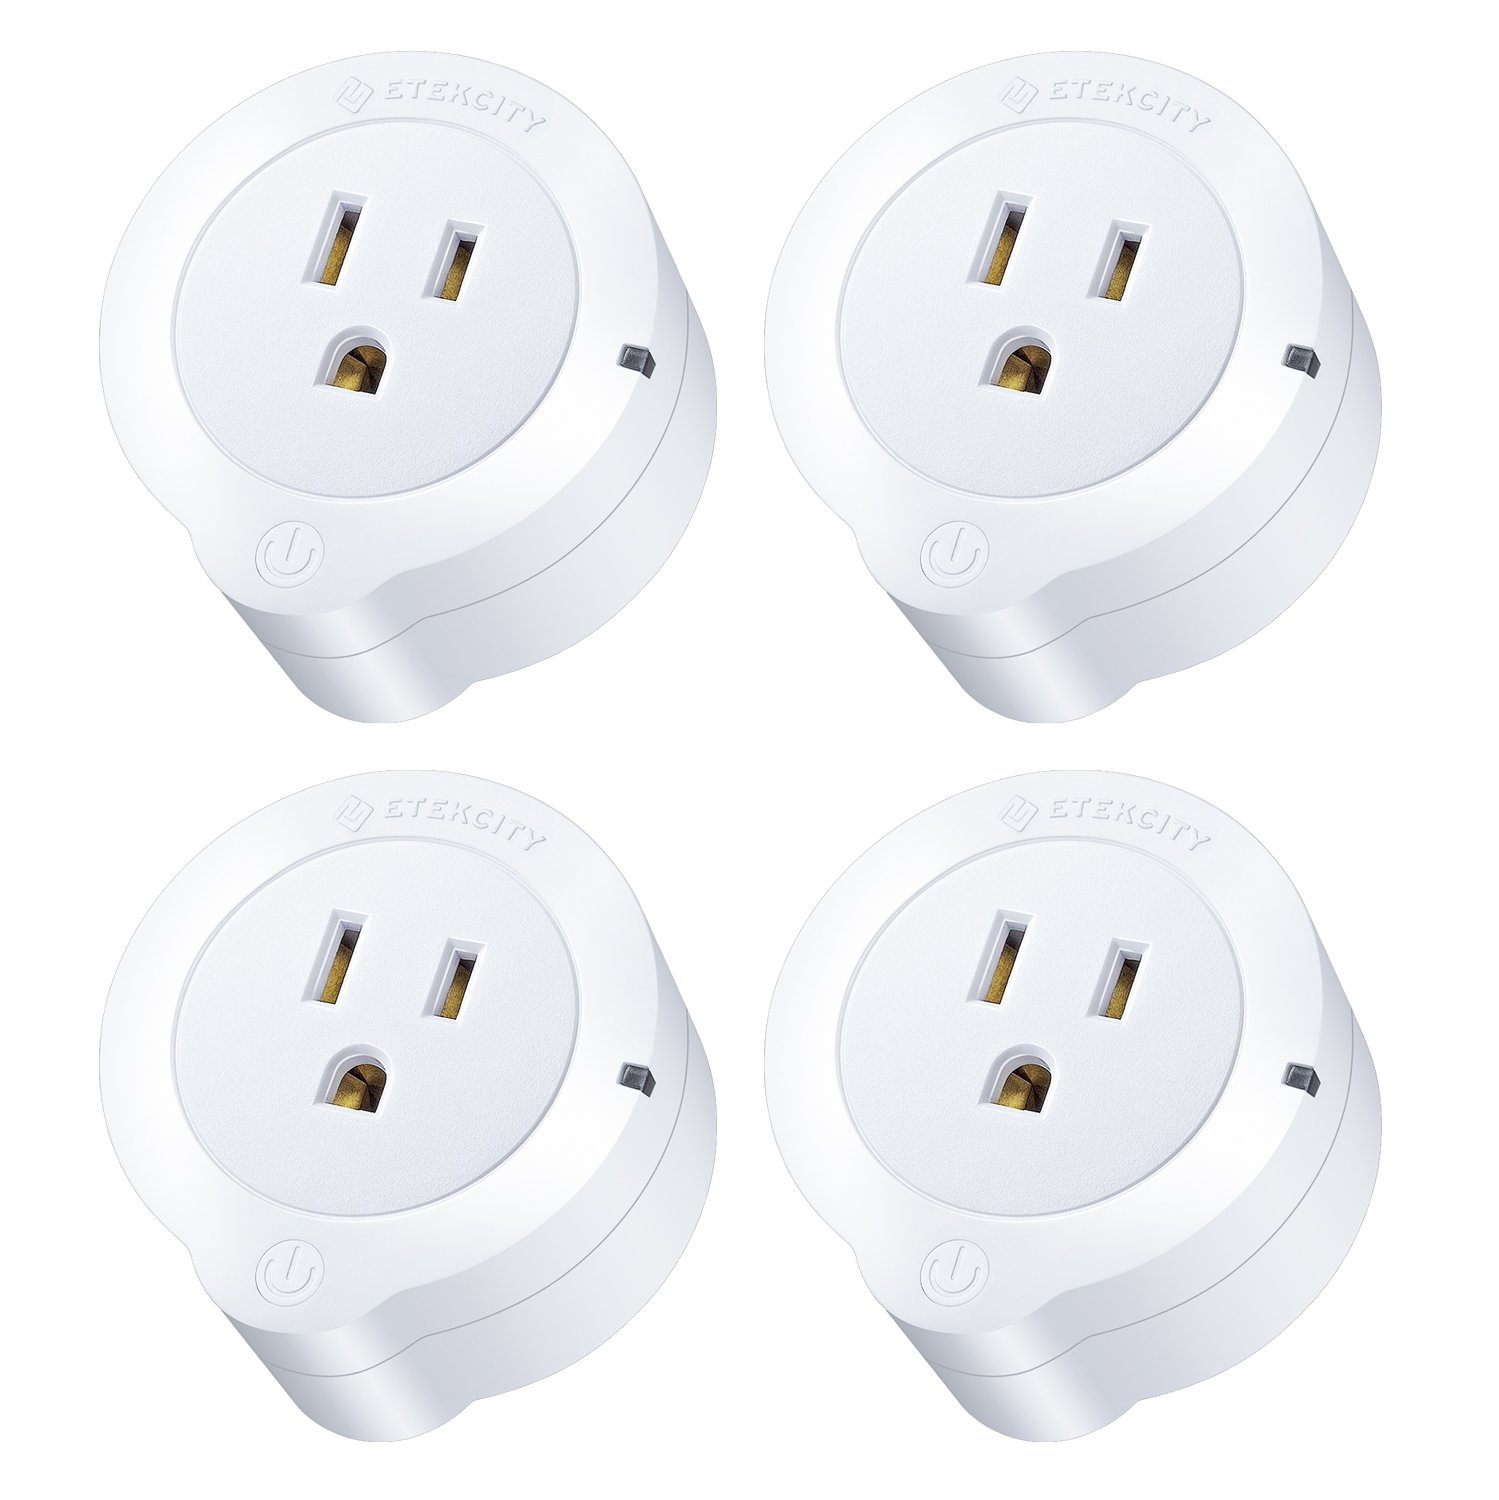 Book Cover Etekcity WiFi Smart Plug, Voltson Mini Outlet with Energy Monitoring (4-Pack), No Hub Required, ETL Listed, White, Works with Alexa, Google Home and IFTTT